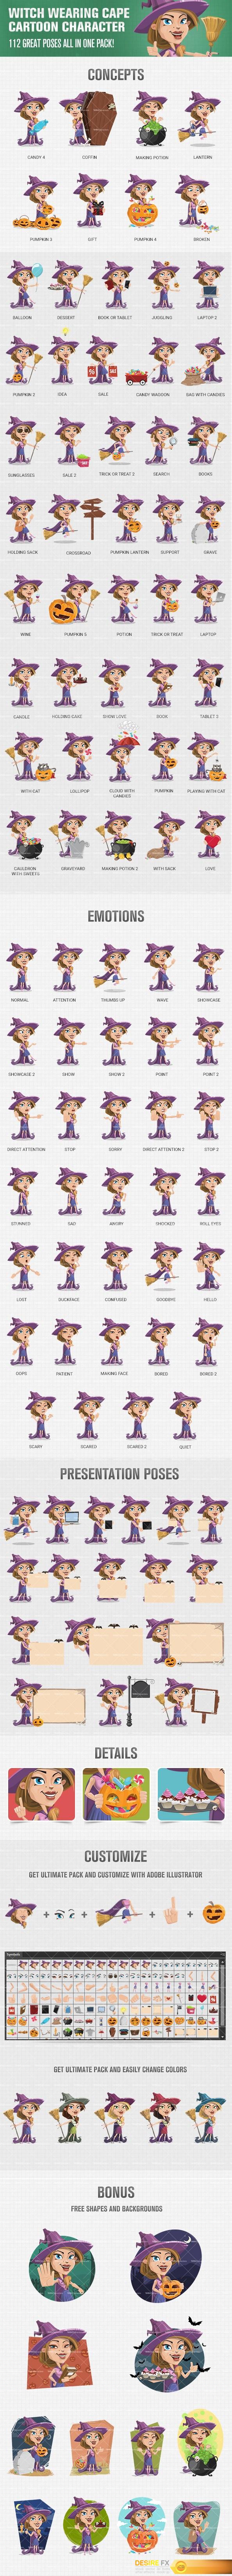 Witch Wearing Cape Cartoon Character